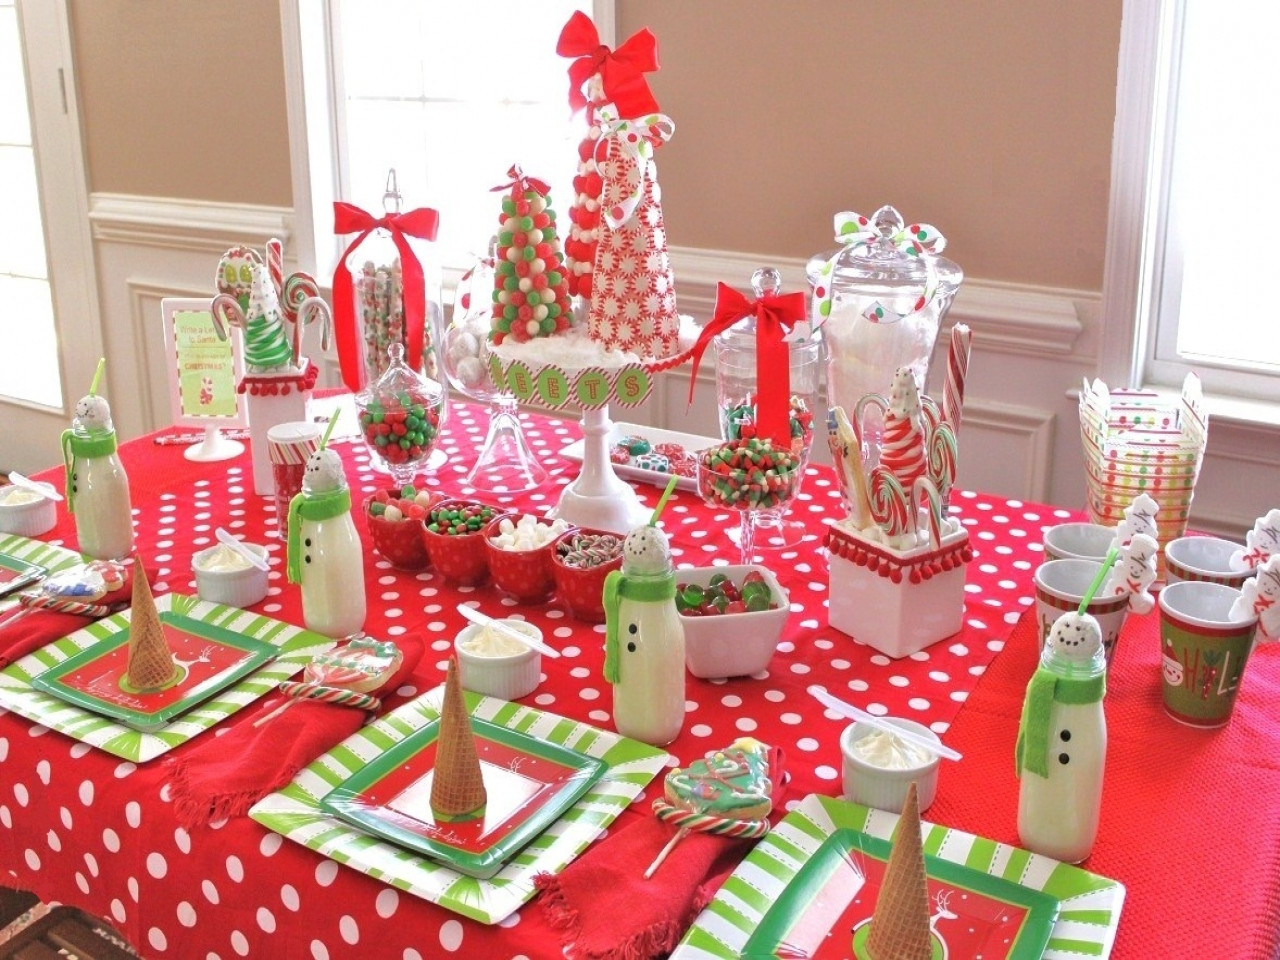 Christmas Party Themes Ideas For Adults
 Bedroom furniture placement ideas kids christmas birthday